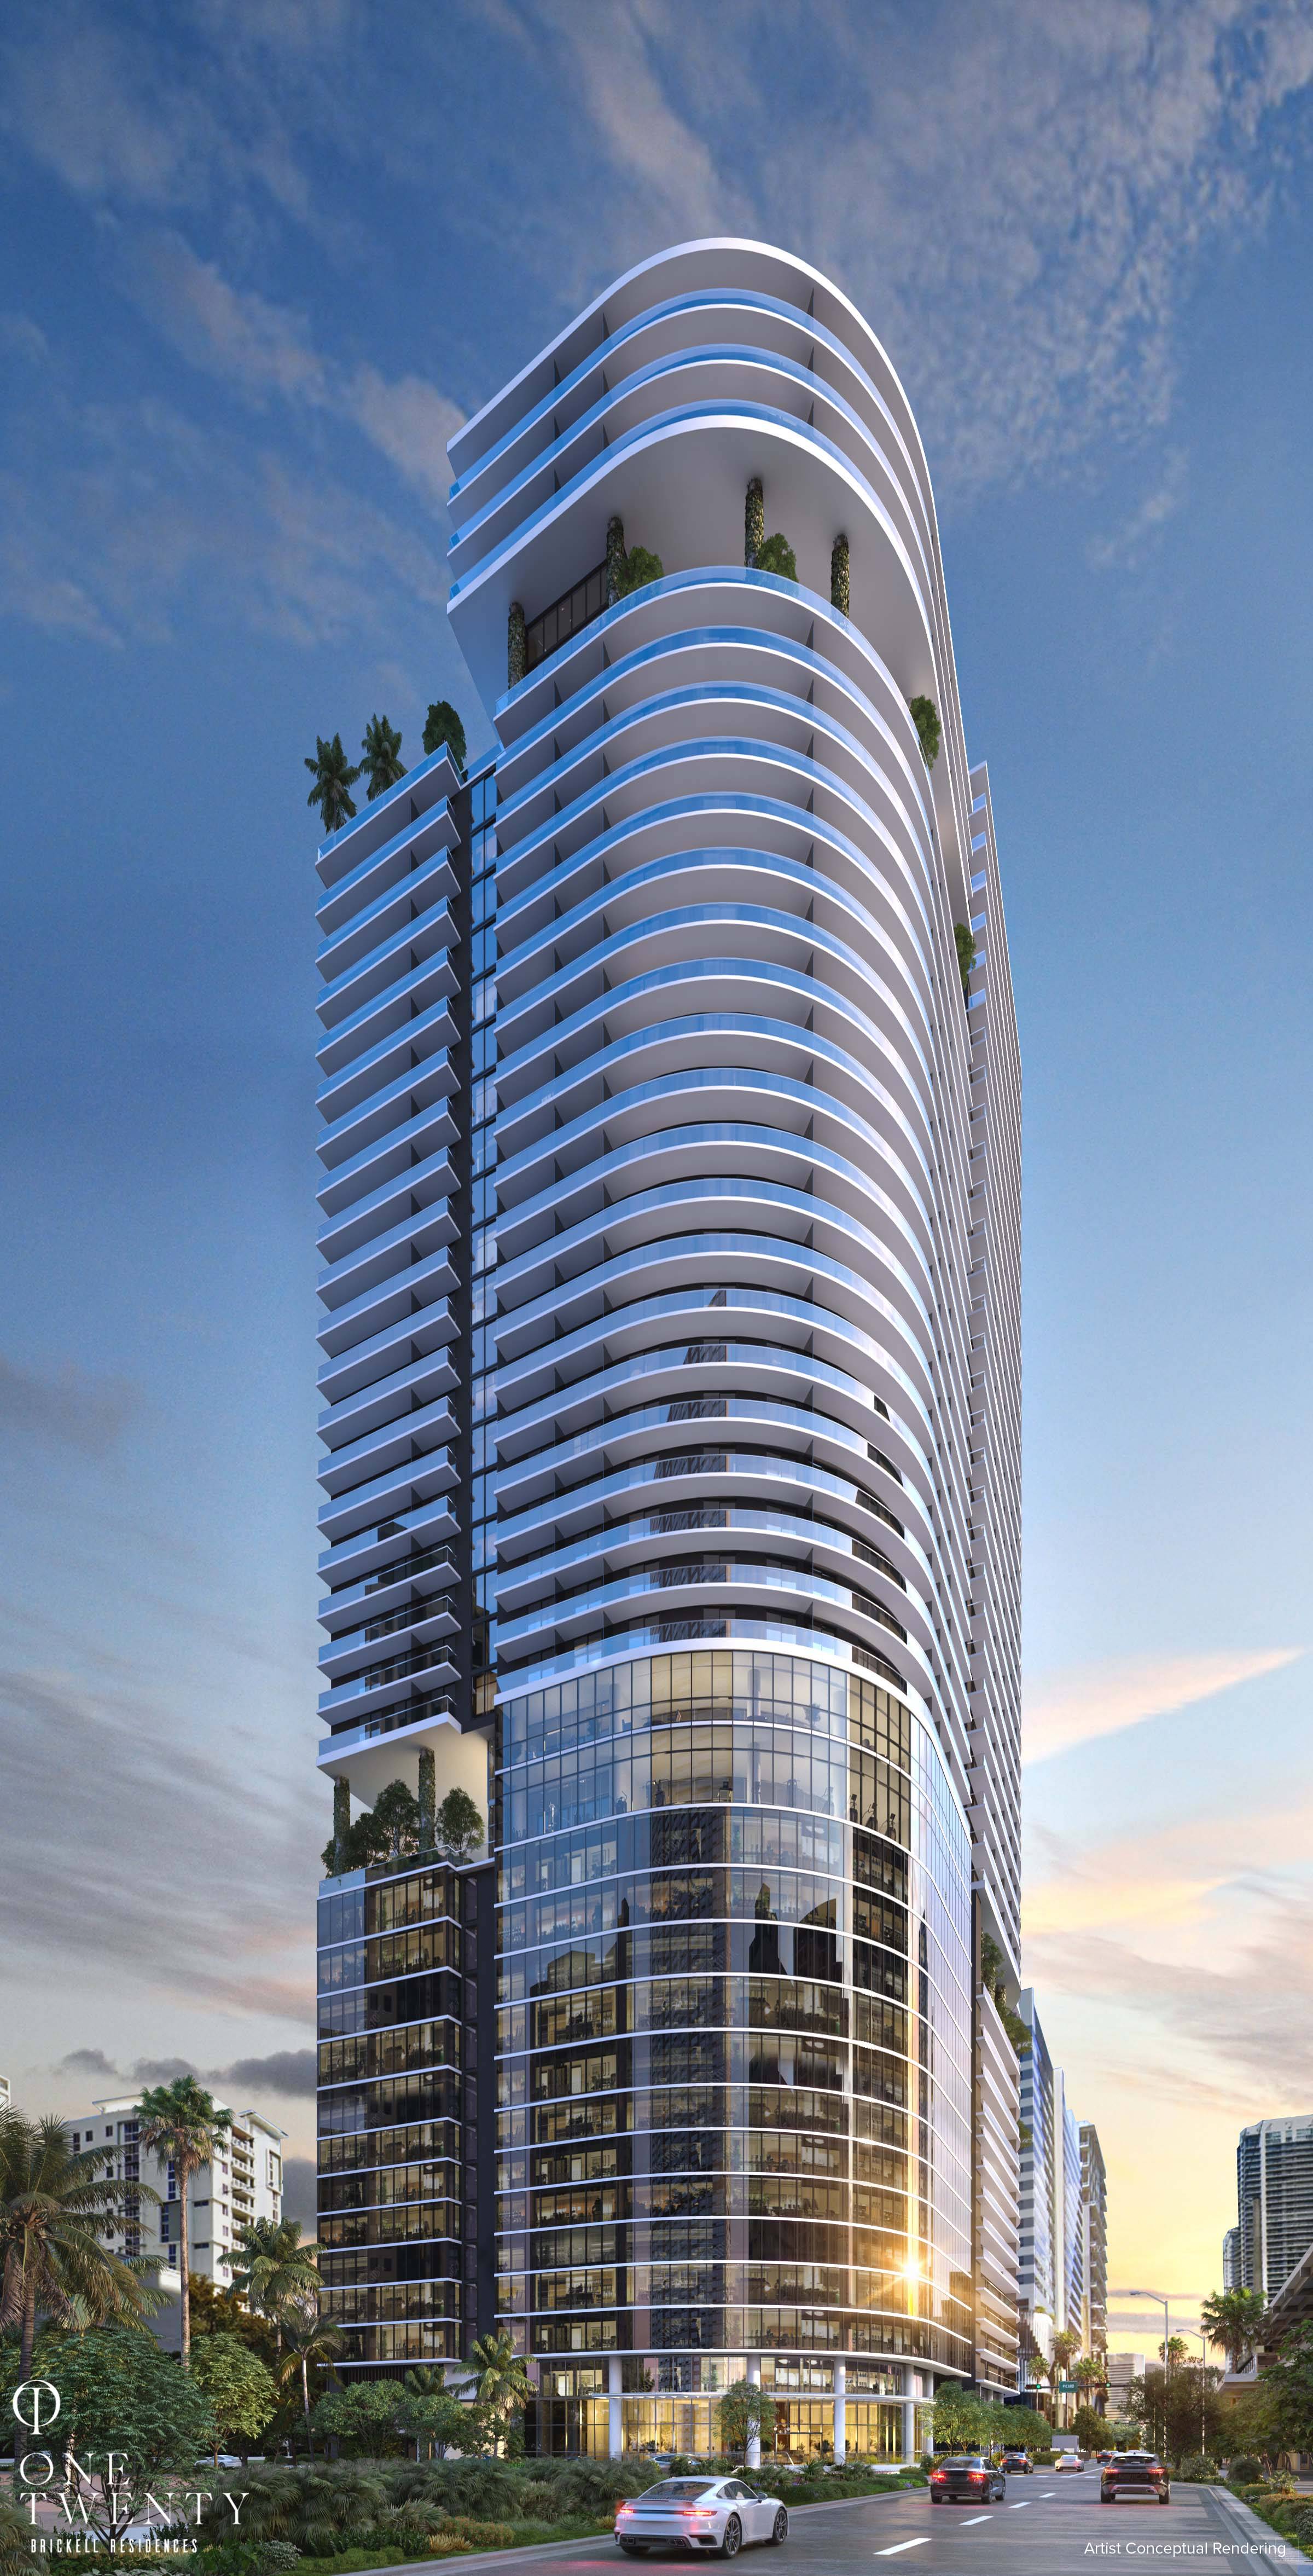 One of a kind Condominium in Brickell with Office Space Included I 2Bedrooms, 2Bathrooms I 943 Sq Ft I $1,262,838